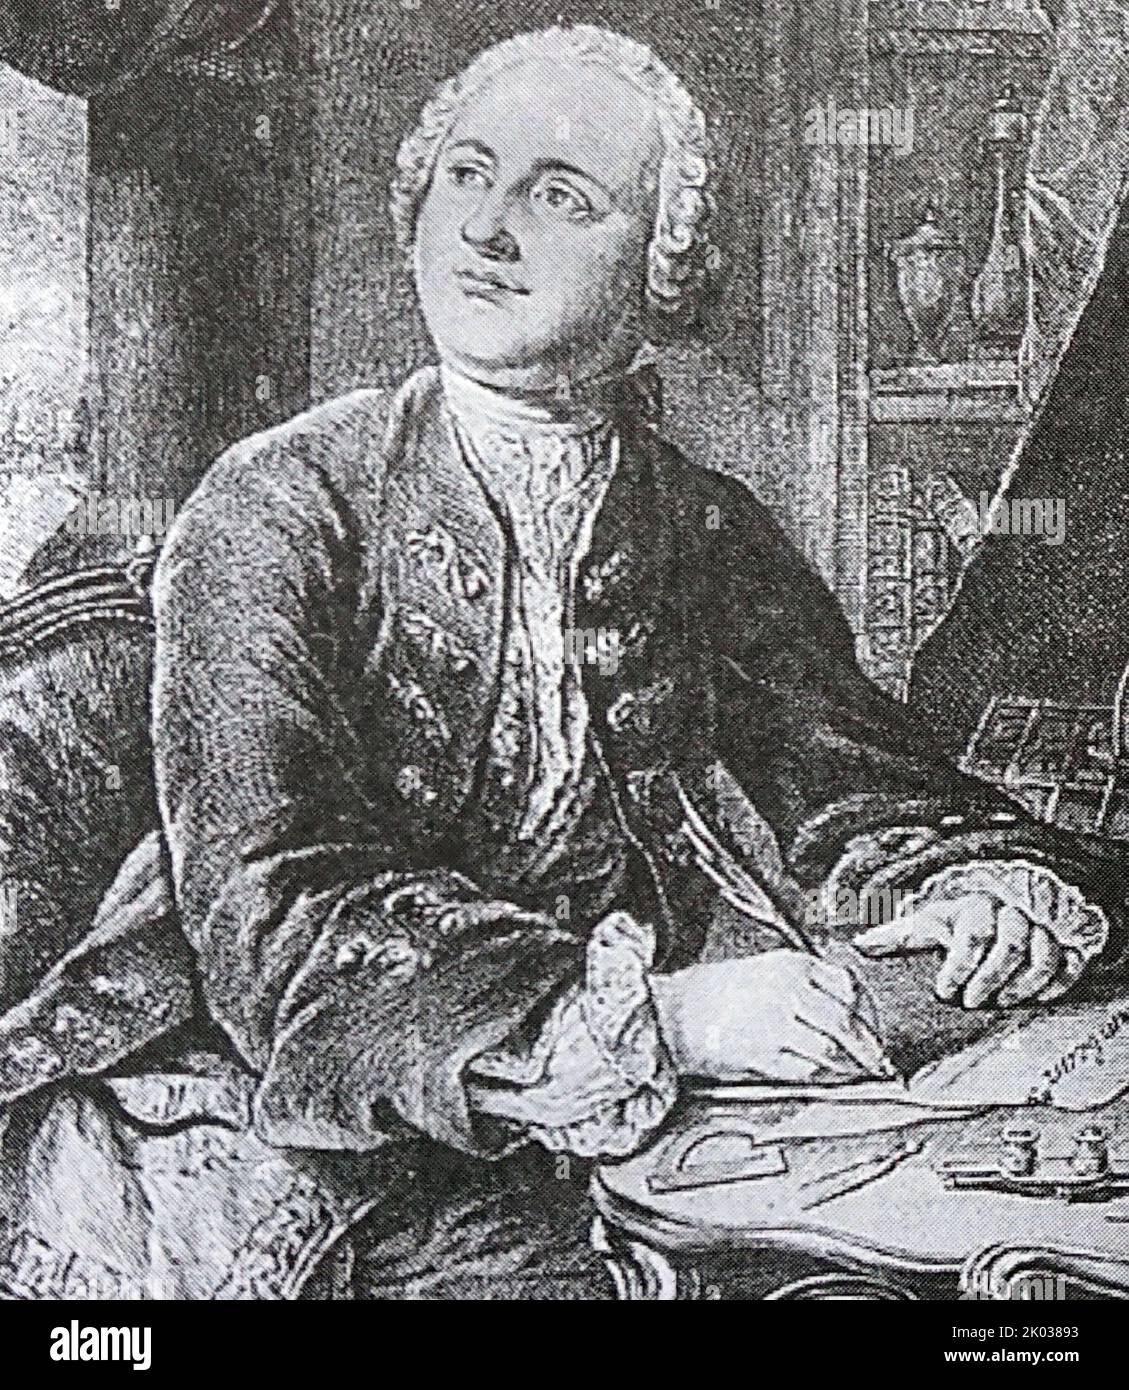 Mikhail Vasilievich Lomonosov, founder of Moscow State University. Mikhail Vasilyevich Lomonosov (1711 - 1765) Russian polymath, scientist and writer, who made important contributions to literature, education, and science. Stock Photo